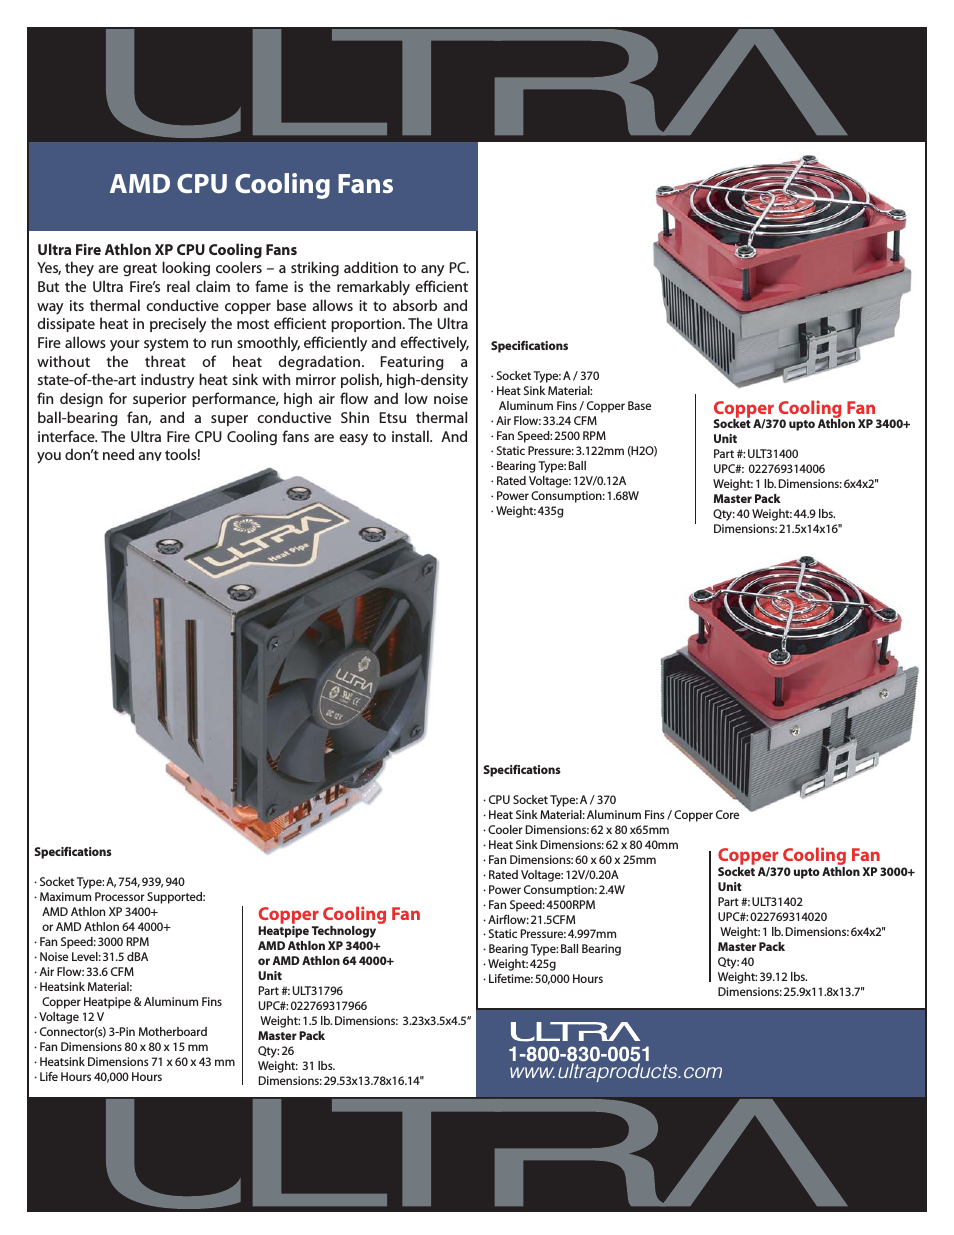 CPU Cooling Fans AMD